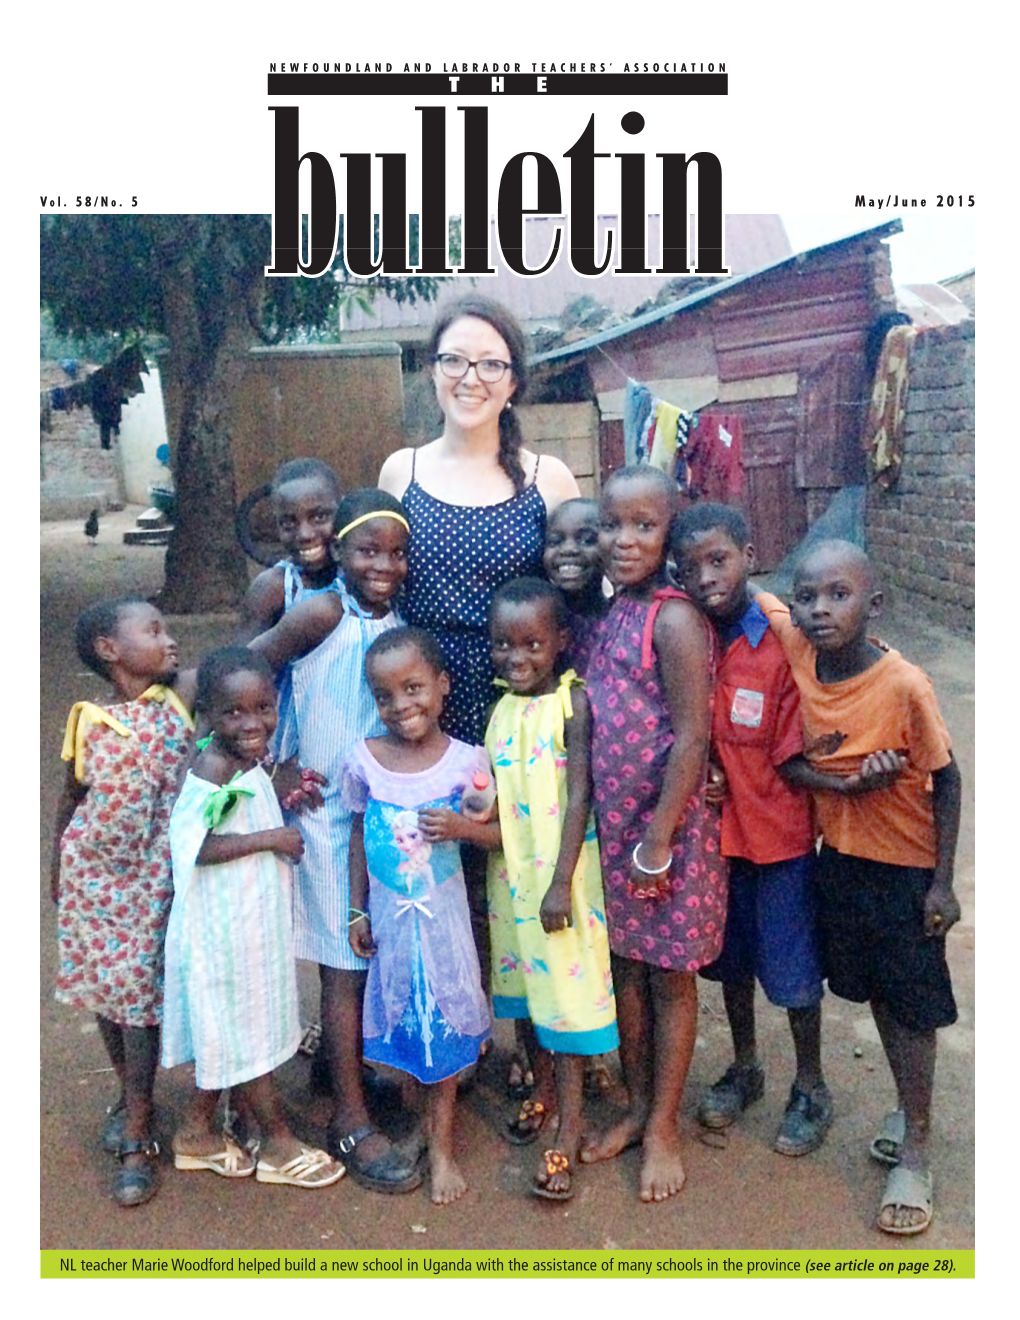 The Bulletin Vol. 58 No. 5 May/June 2015 from the NLTA